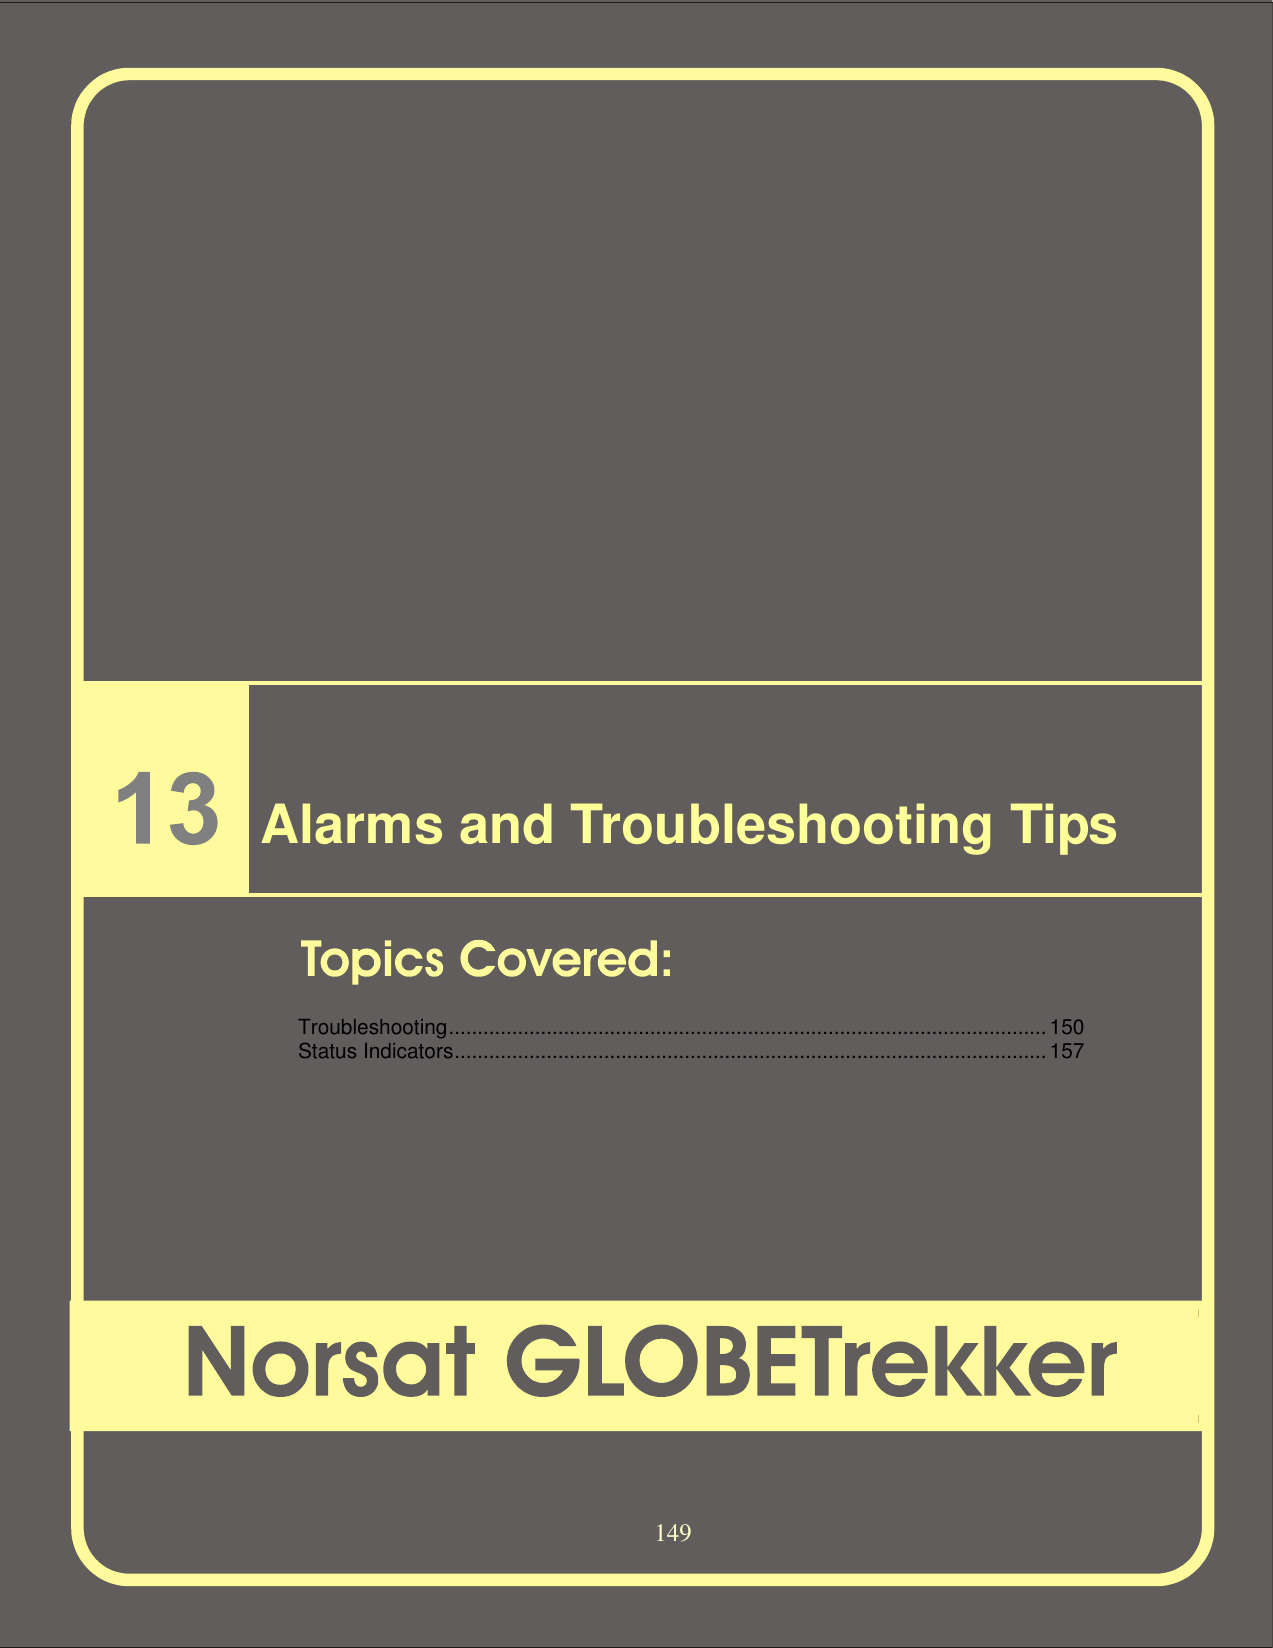   149                     Alarms and Troubleshooting Tips      Troubleshooting........................................................................................................150 Status Indicators.......................................................................................................157 